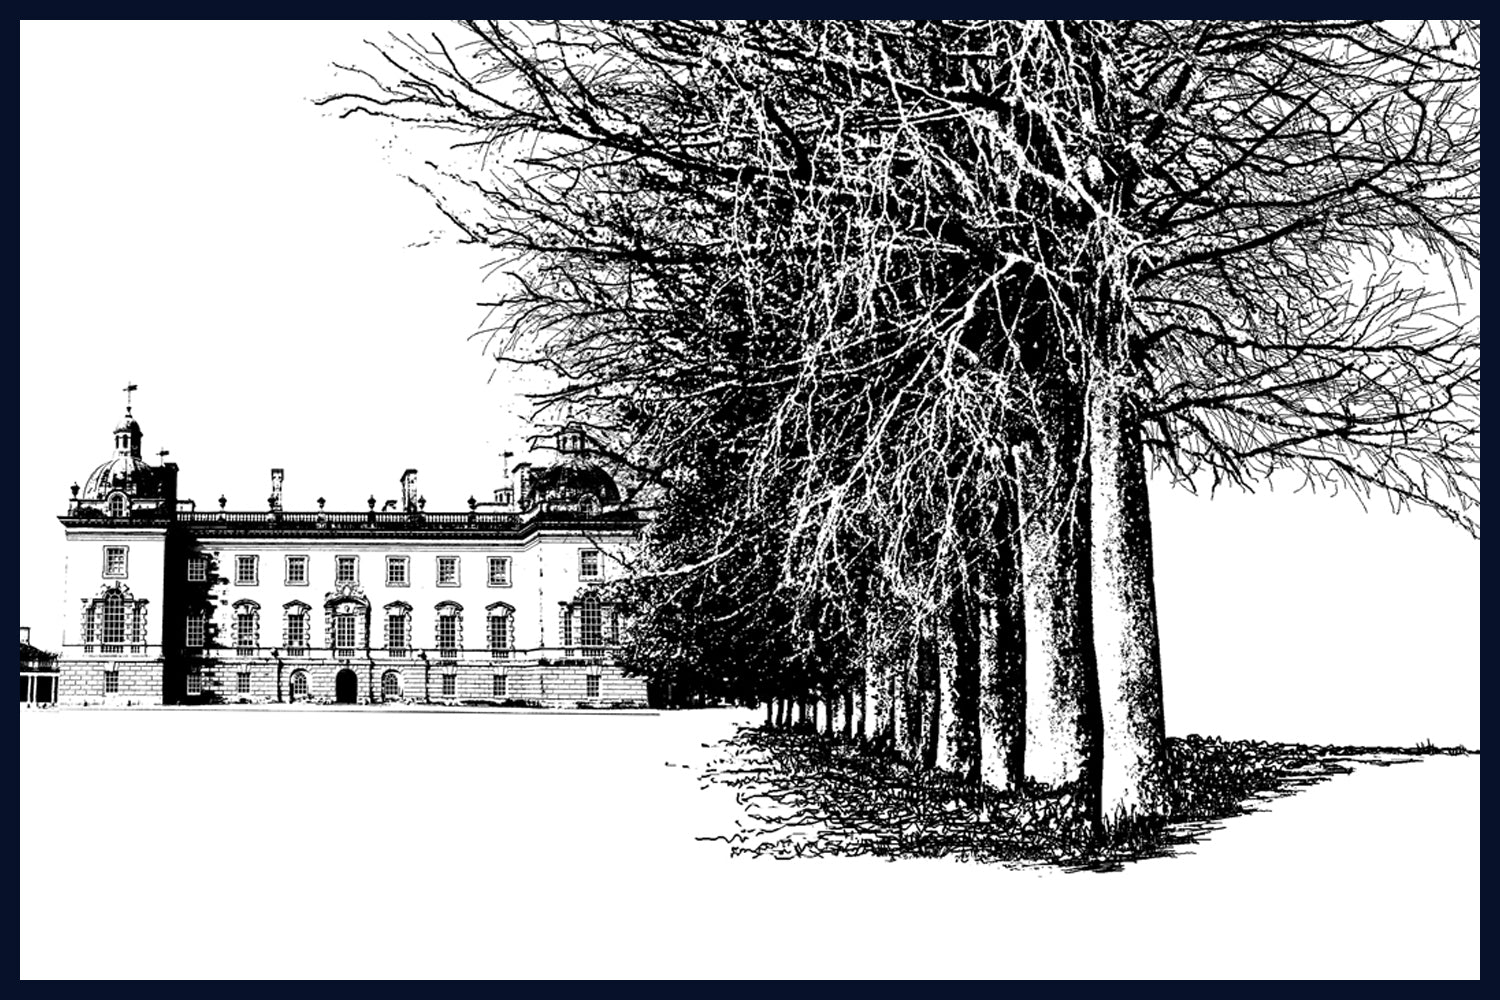 Houghton Hall: West Perspective, Norfolk. Limited edition fine art print by Jac Scott